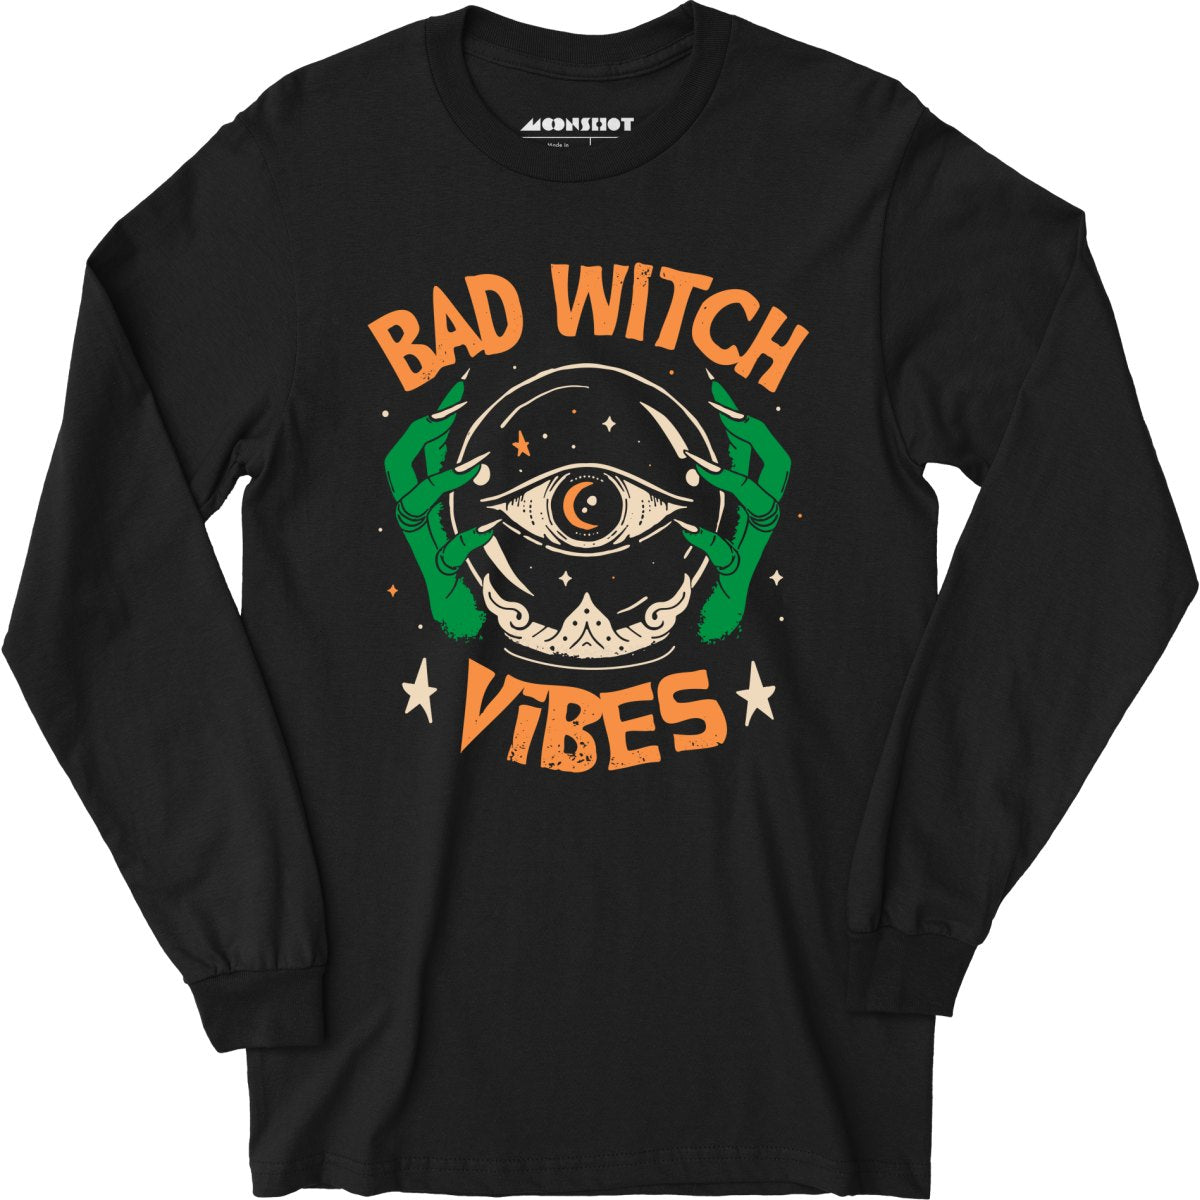 Bad Witch Vibes - Long Sleeve T-Shirt